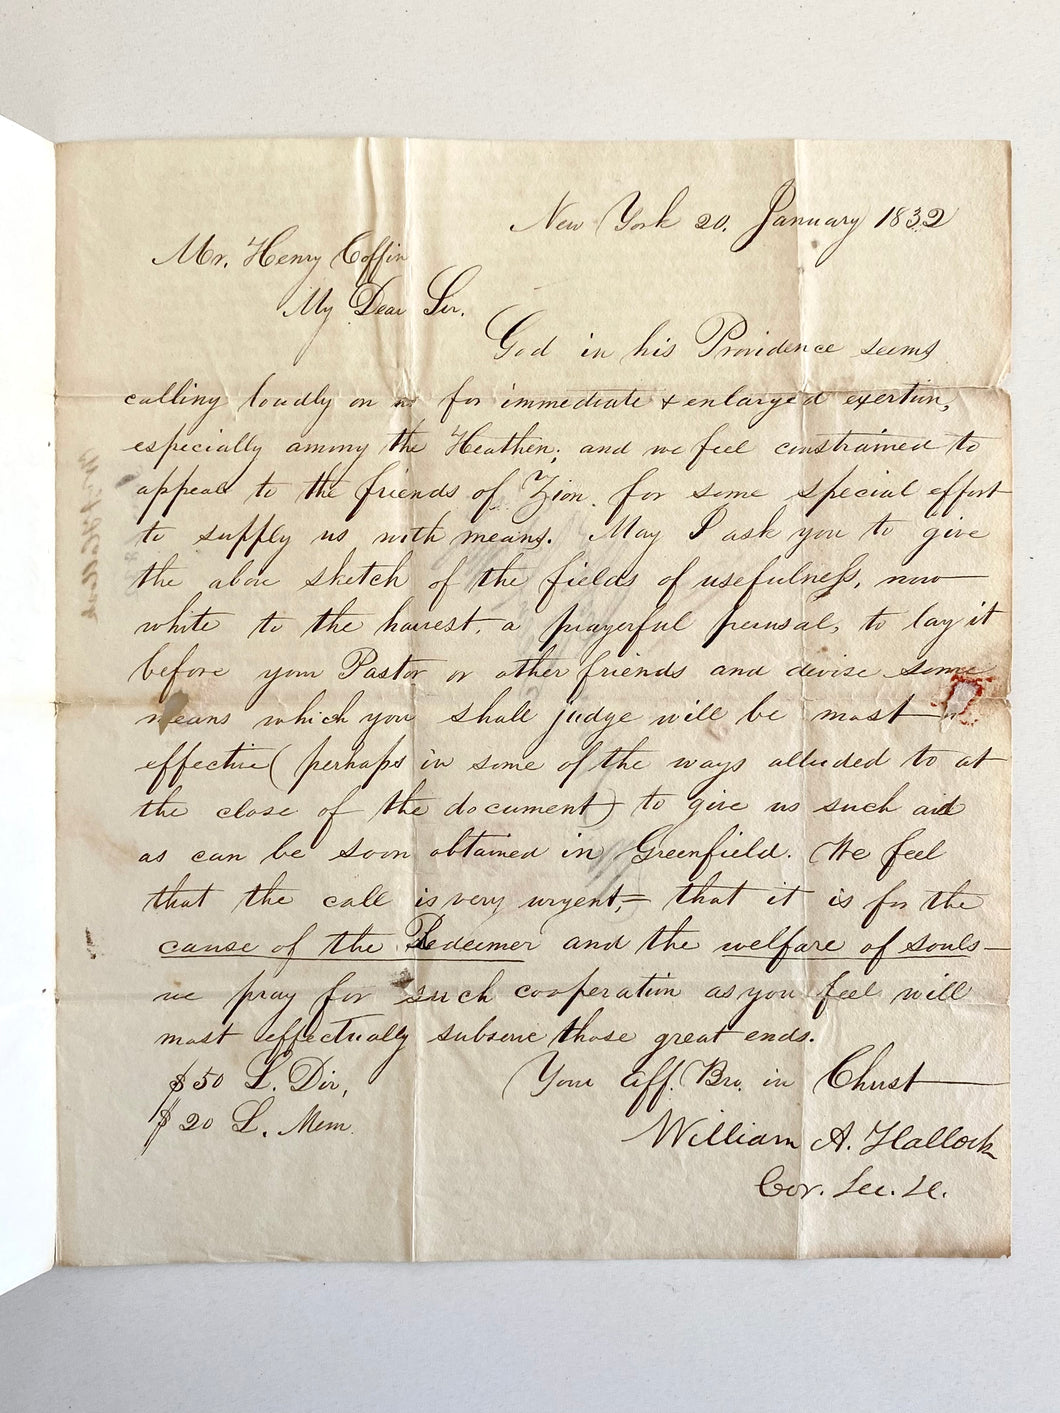 1832 WILLIAM A. HALLOCK. Rare Circular & Autograph Letter by Founder of the American Tract Society.